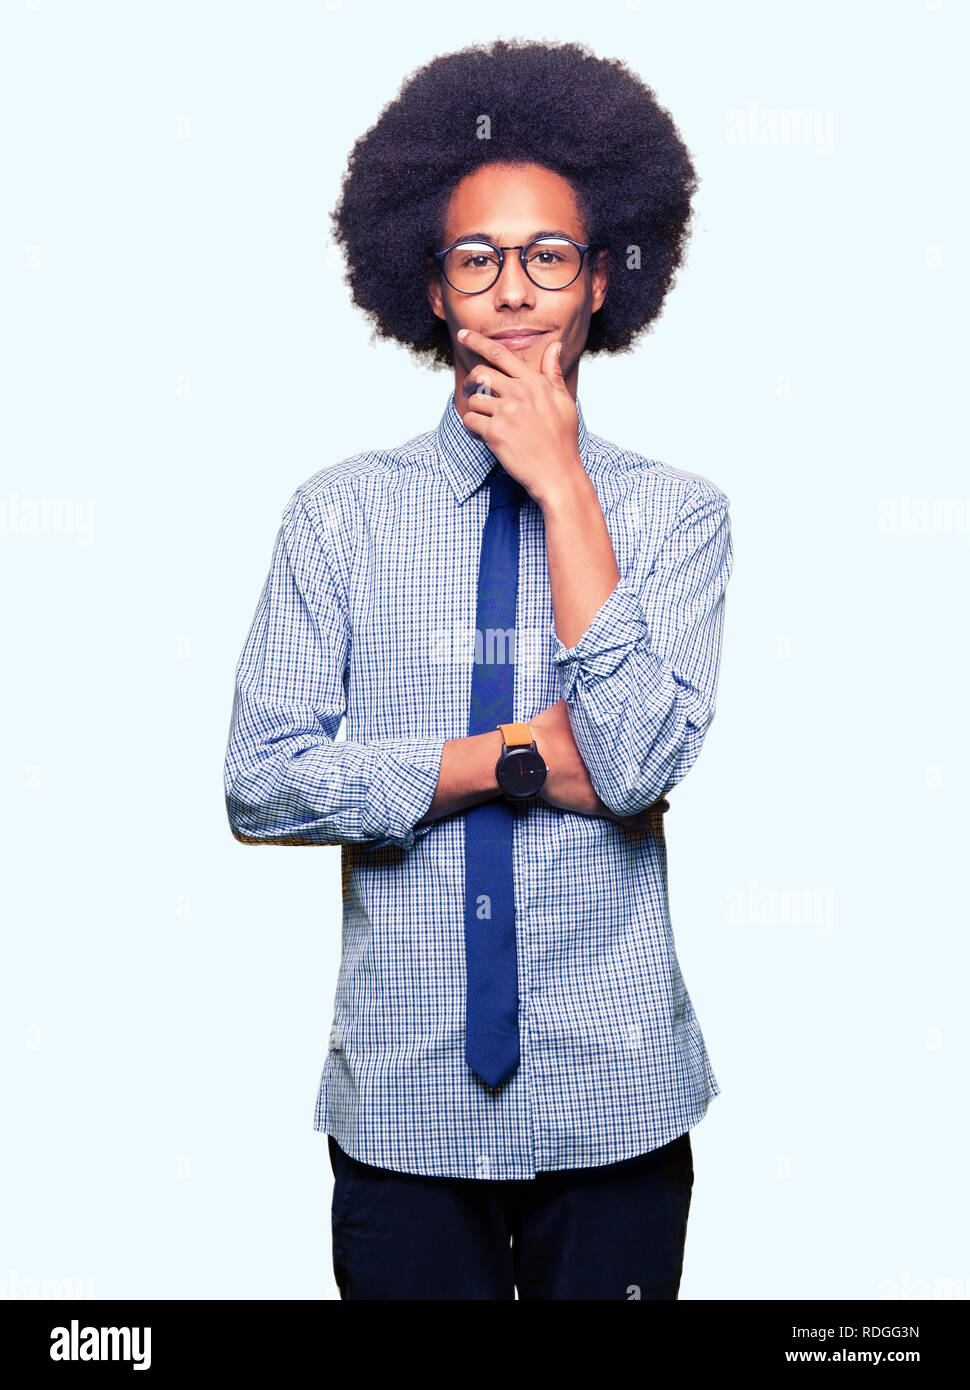 Young african american business man with afro hair wearing glasses looking confident at the camera with smile with crossed arms and hand raised on chi Stock Photo